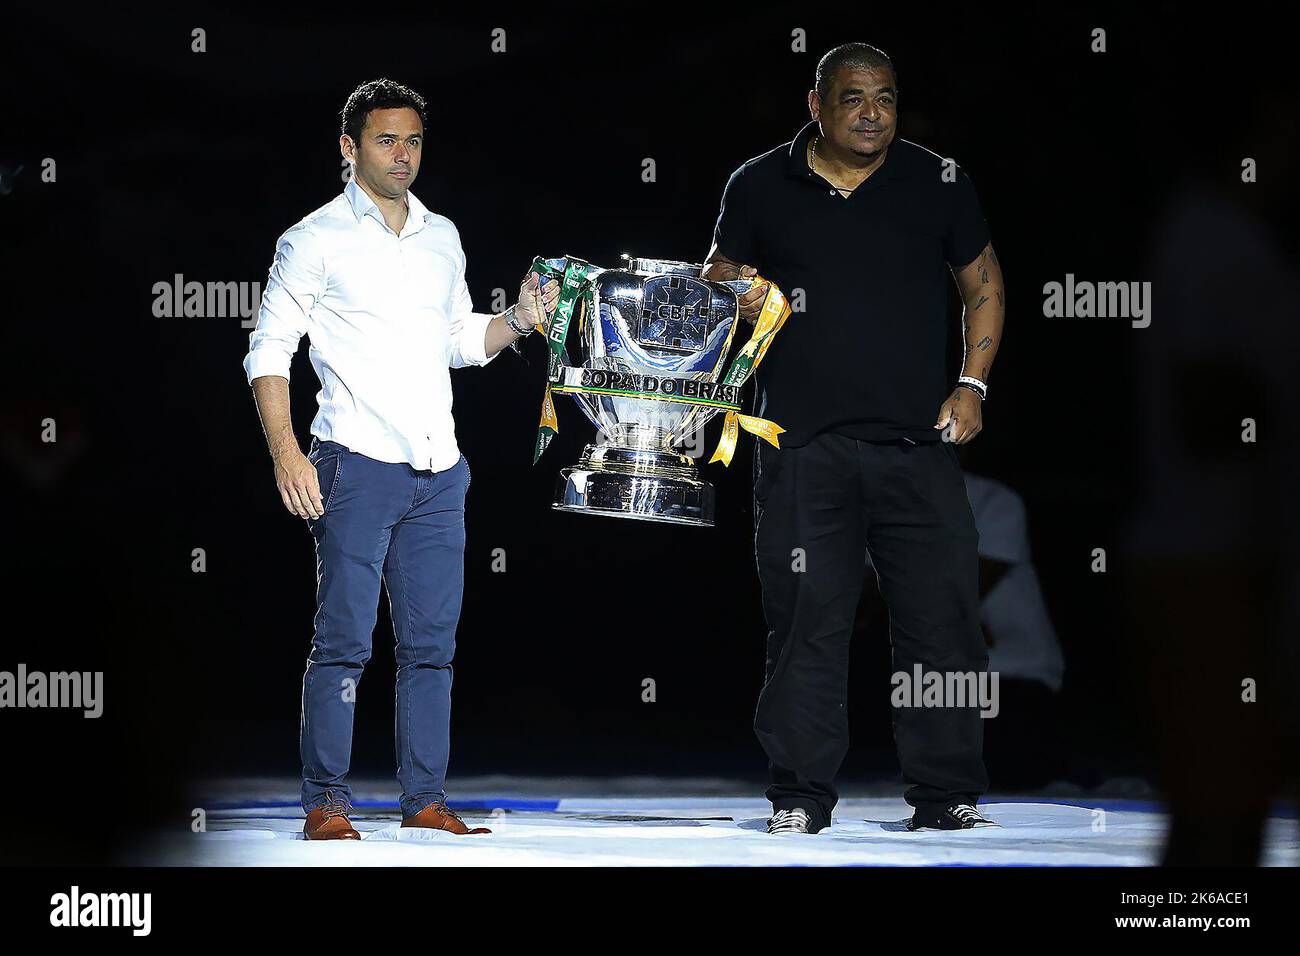 Sao Paulo, Brazil. 13th Oct, 2022. Former players Juan do Flamengo and Vampeta from Corinthians, carry the Cup of the Copa do Brasil, moments before the match between Corinthians and Flamengo, for the 1st match of the Final of the Copa do Brasil 2022 at Arena Corinthians, this Wednesday 12. 30761 (Daniel Castelo Branco/SPP) Credit: SPP Sport Press Photo. /Alamy Live News Stock Photo